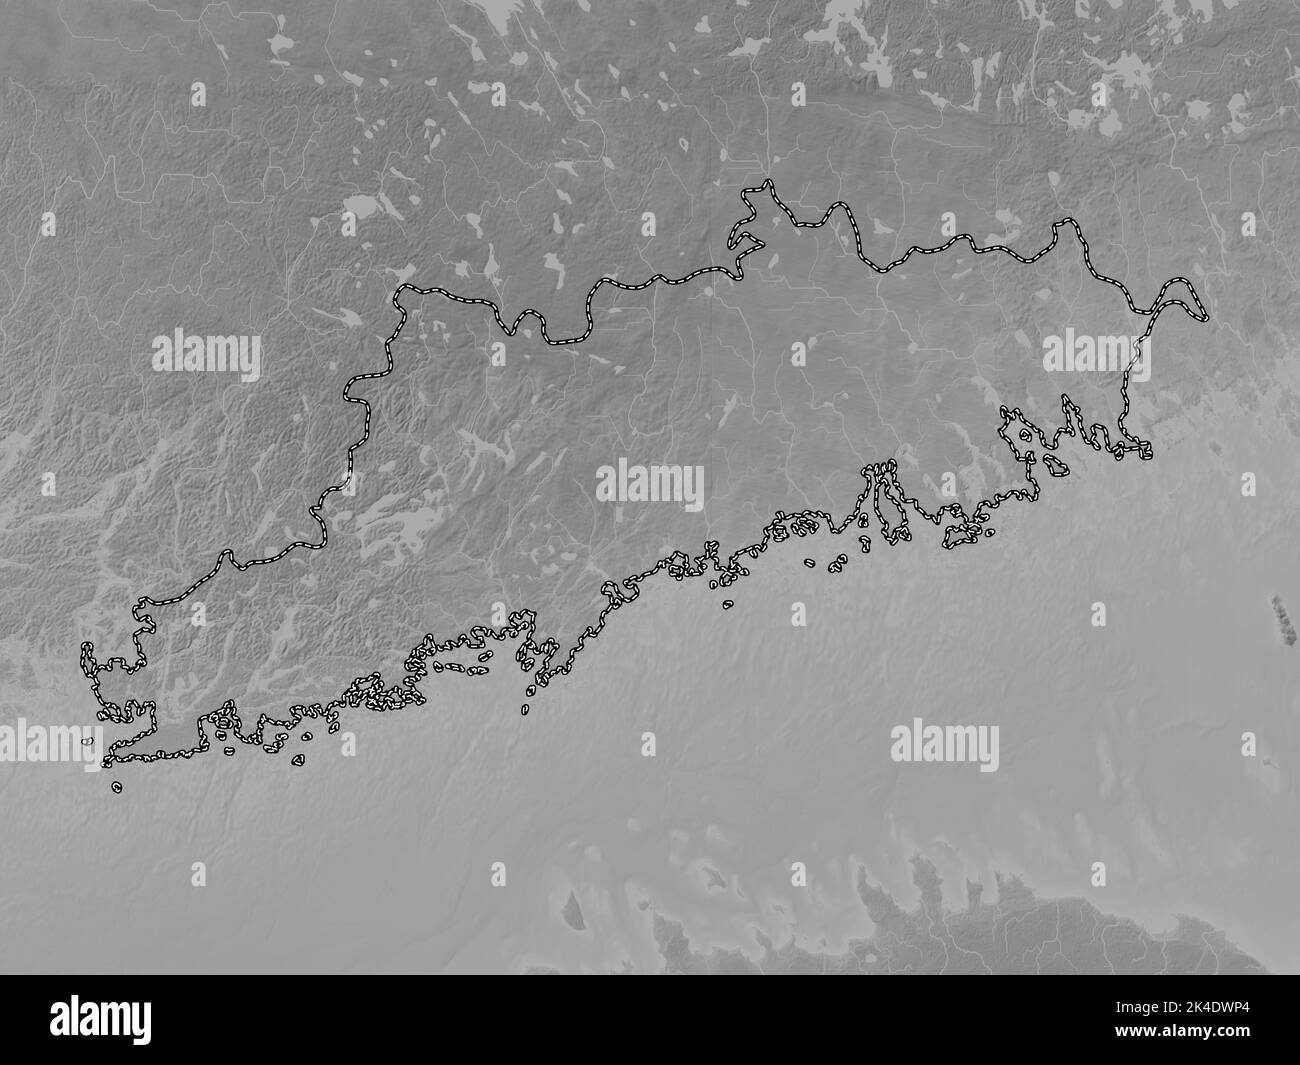 Uusimaa, region of Finland. Grayscale elevation map with lakes and rivers Stock Photo